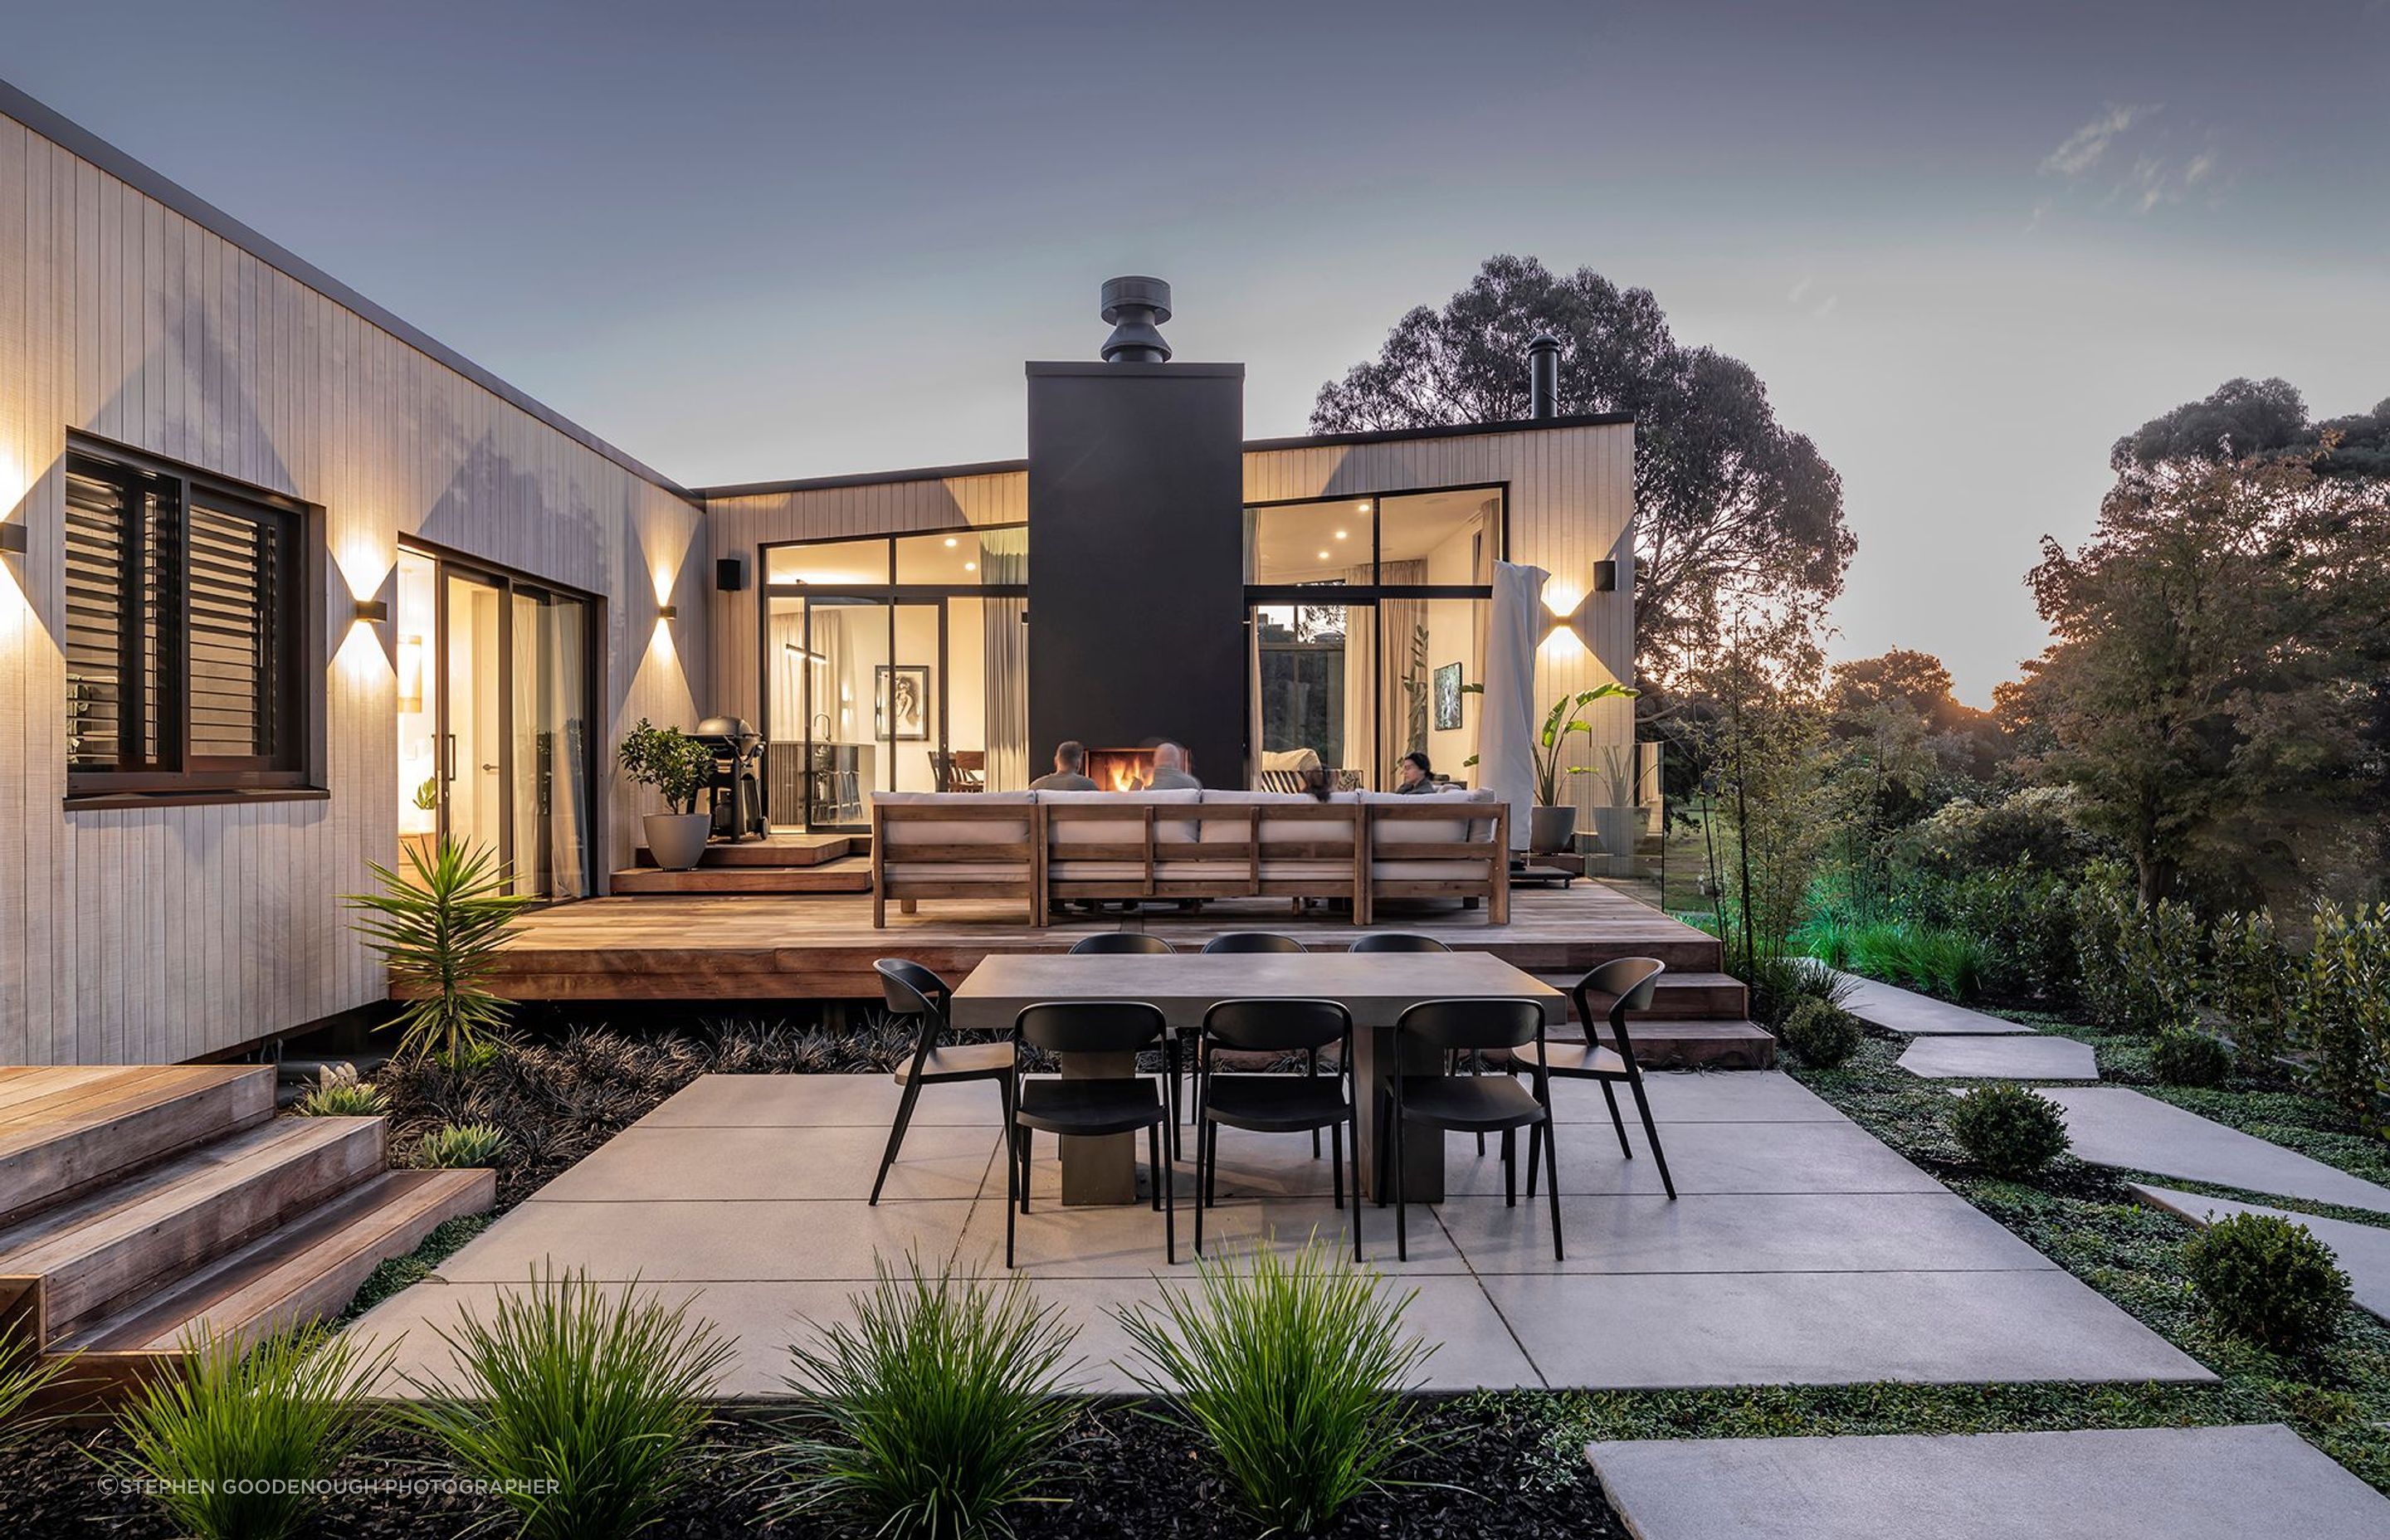 The outdoor living area connects seamlessly to the internal living spaces while connecting the occupants privately to the coastal setting